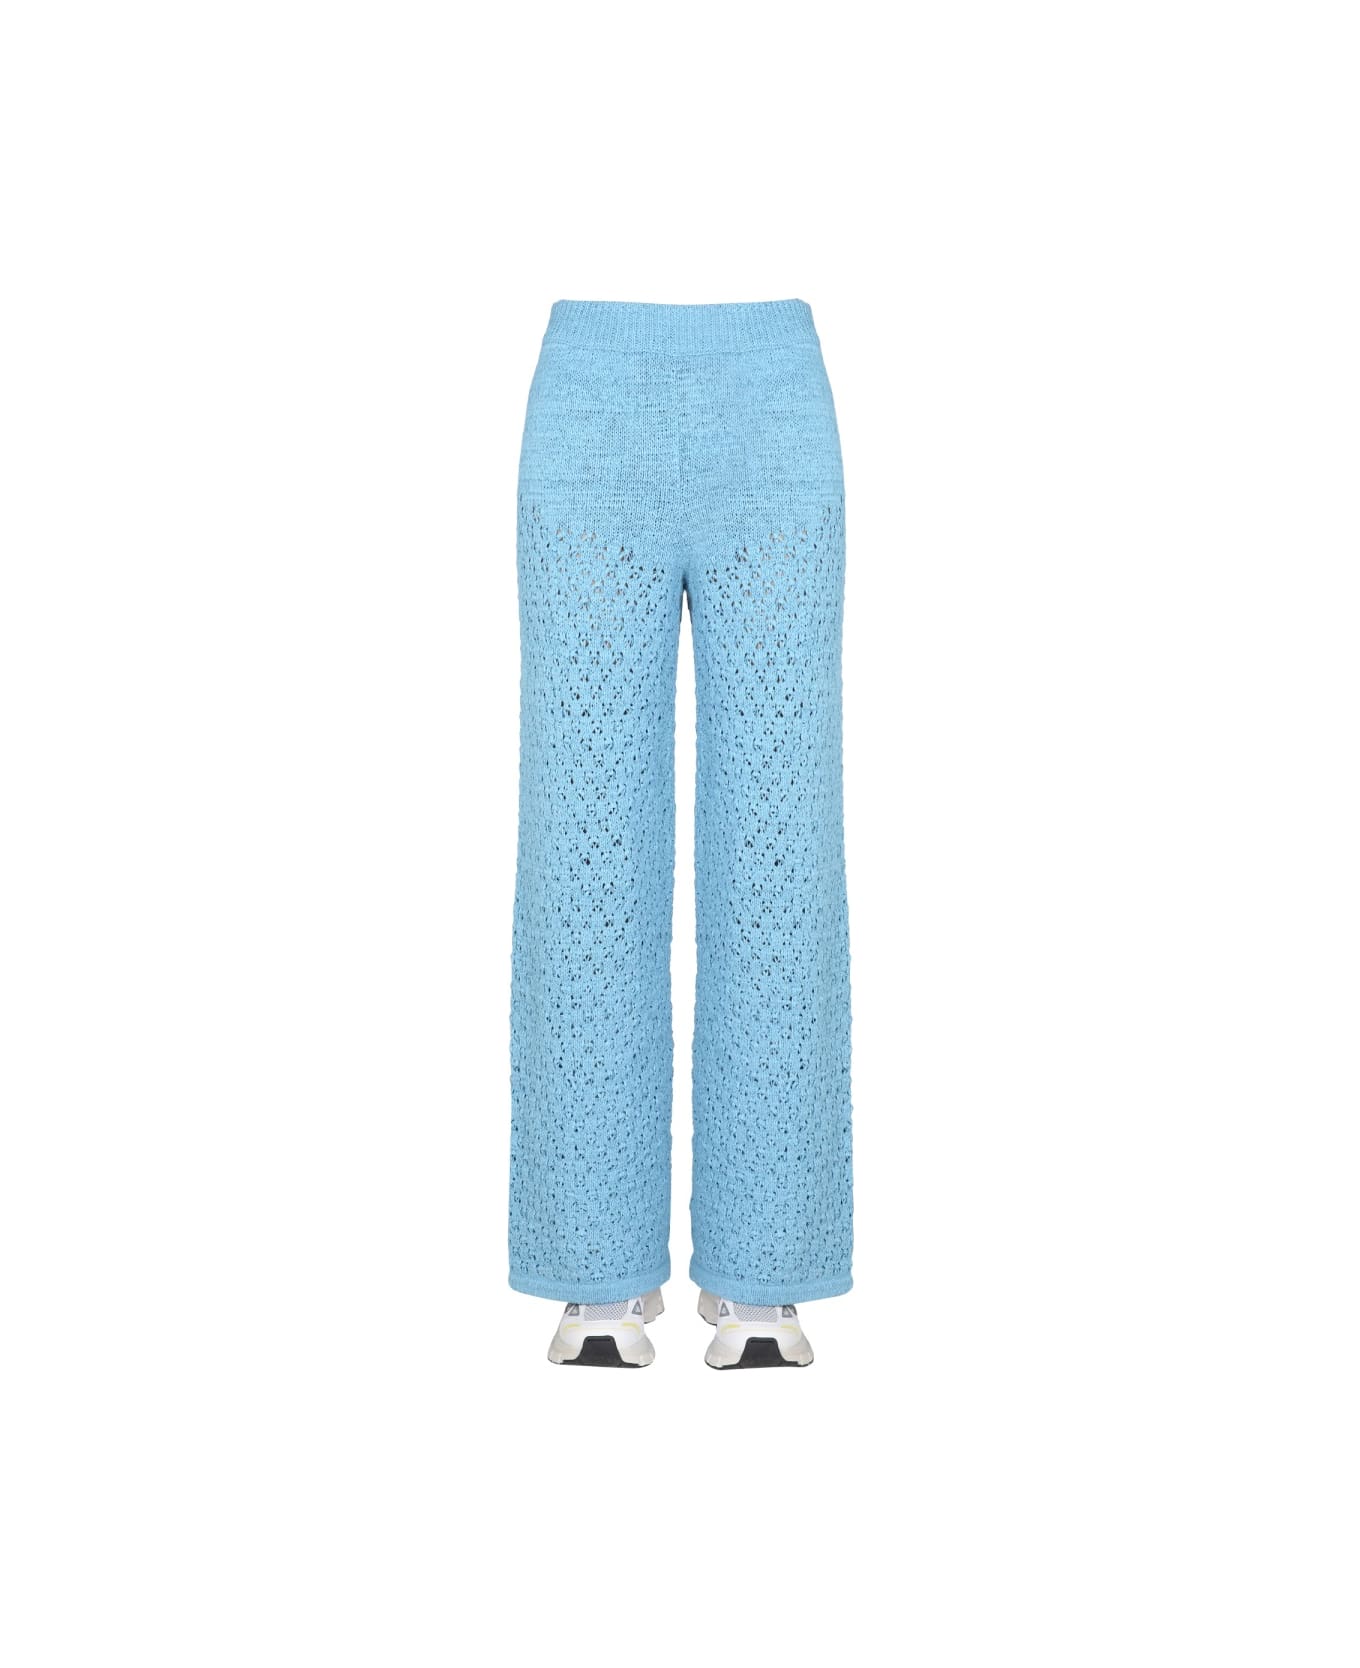 Rotate by Birger Christensen "calla" Trousers - BABY BLUE